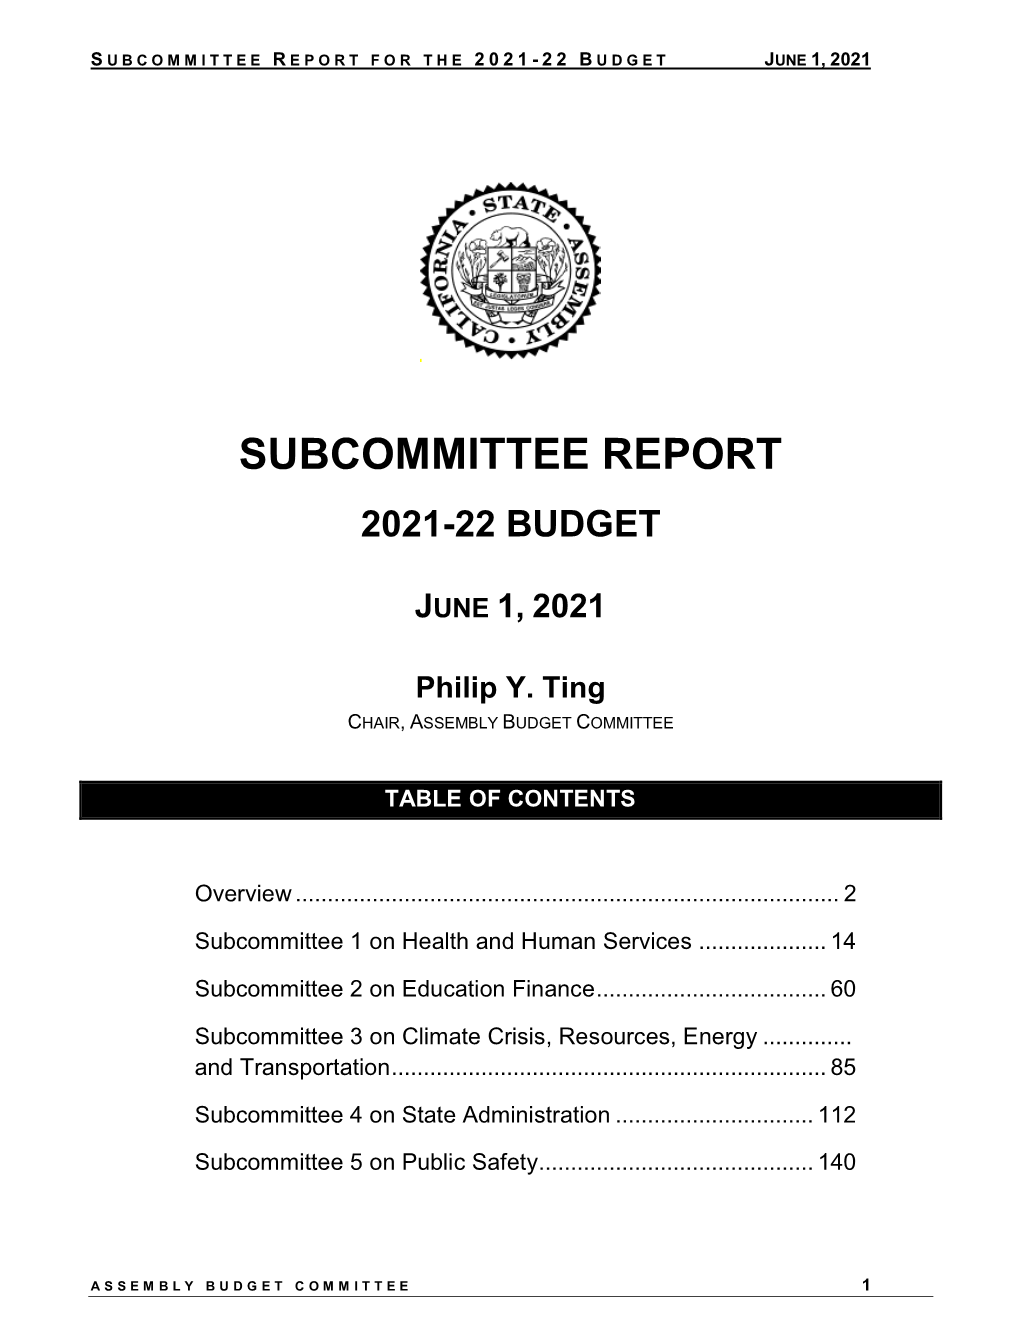 Subcommittee Report of 2021-22 Budget